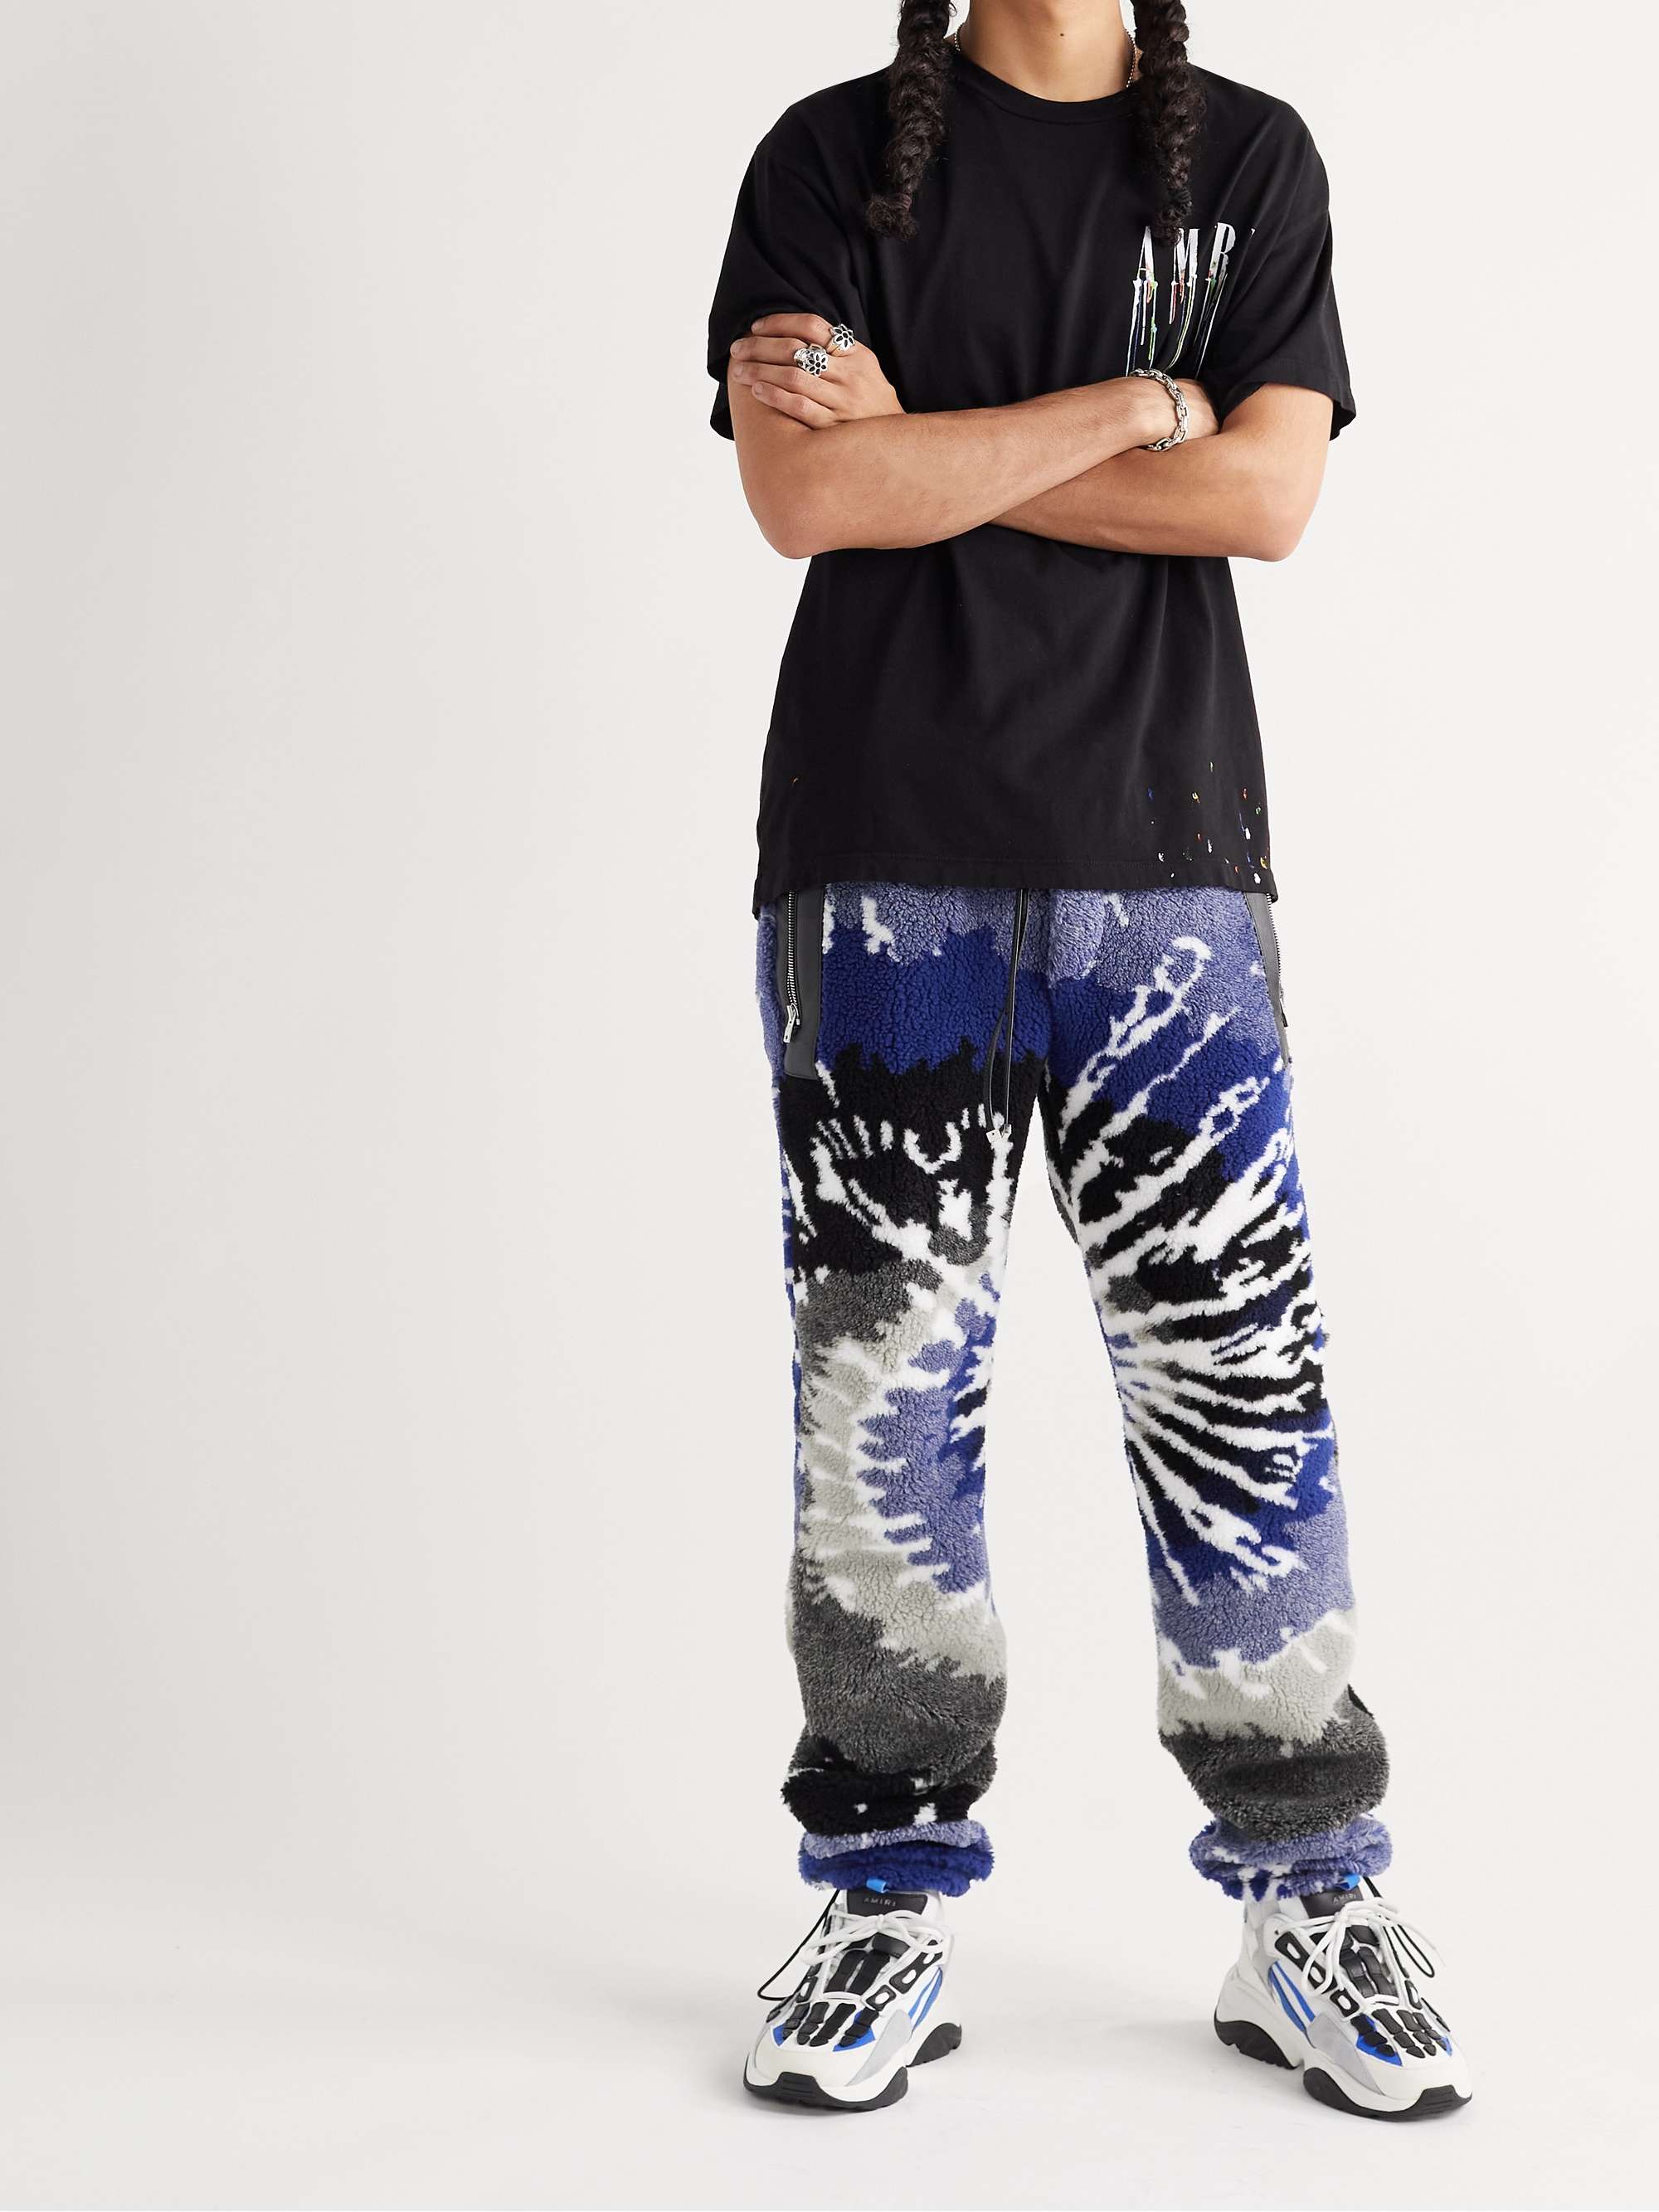 AMIRI Tapered Leather-Trimmed Tie-Dyed Fleece Sweatpants for Men | MR PORTER